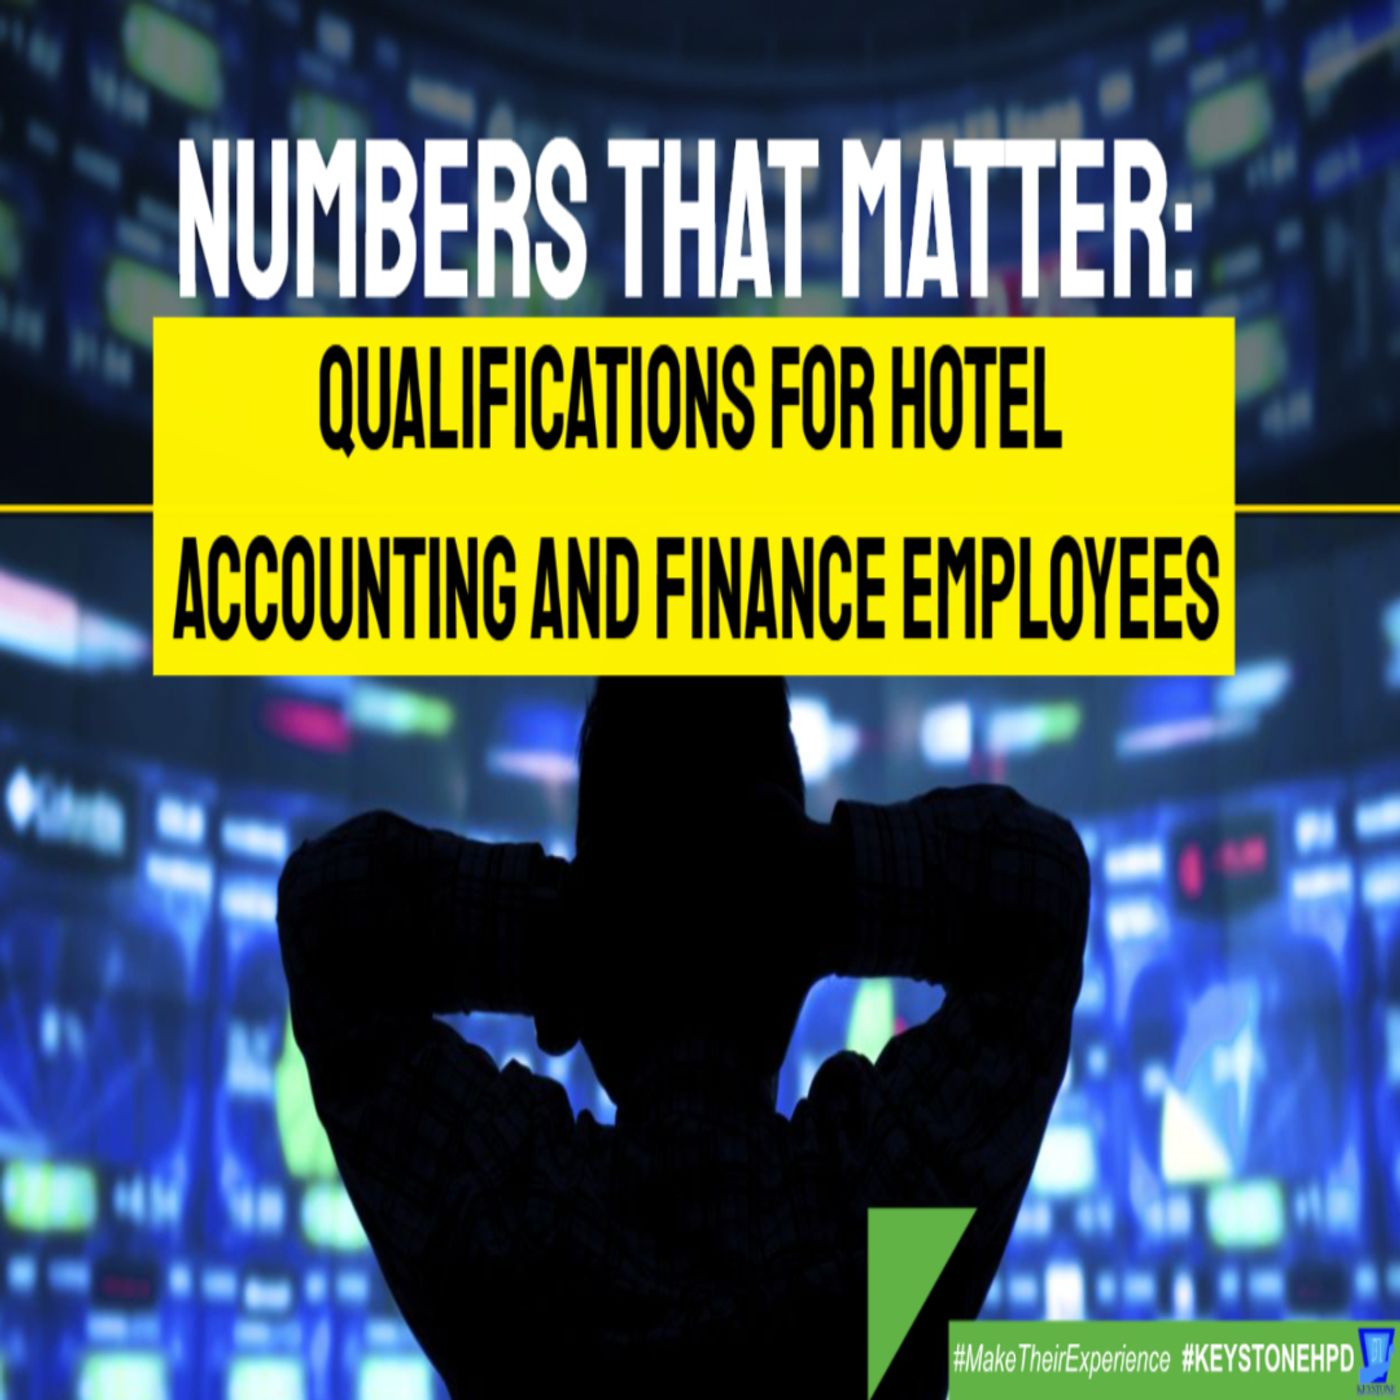 Numbers that Matter: Qualifications for Hotel Accounting and Finance Employees | Eps. #350